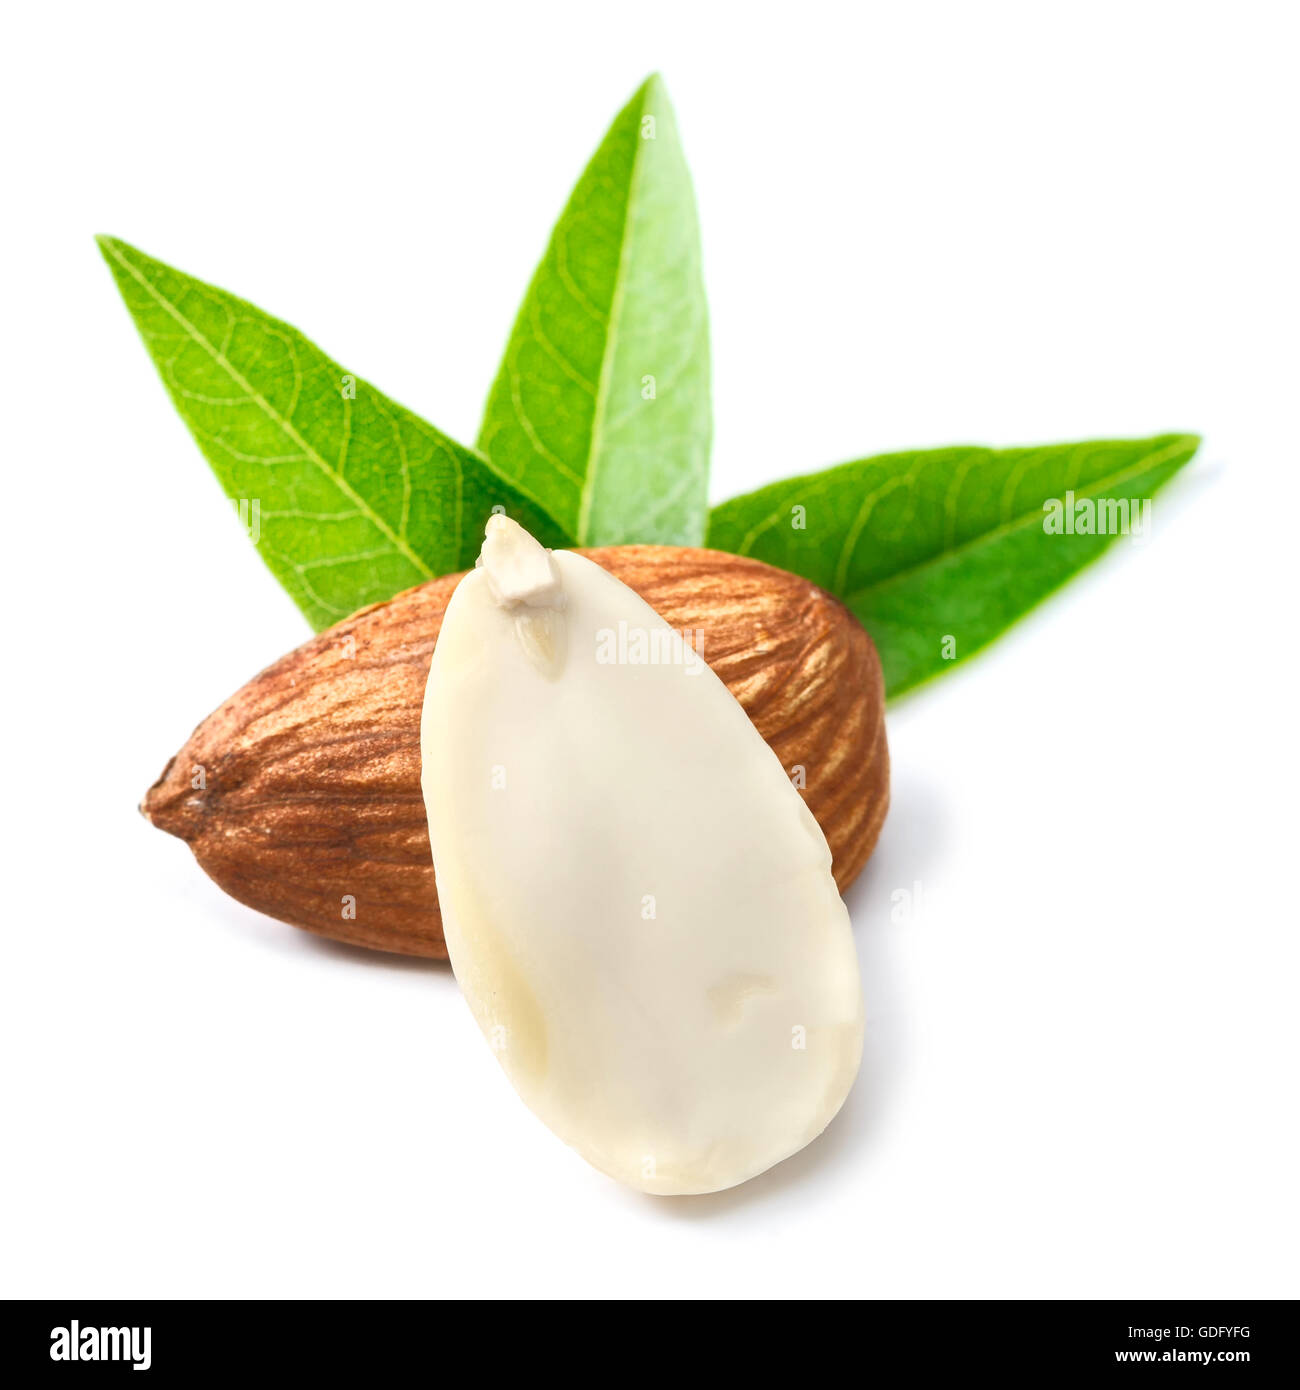 dried almond nuts and fresh leaves on white Stock Photo